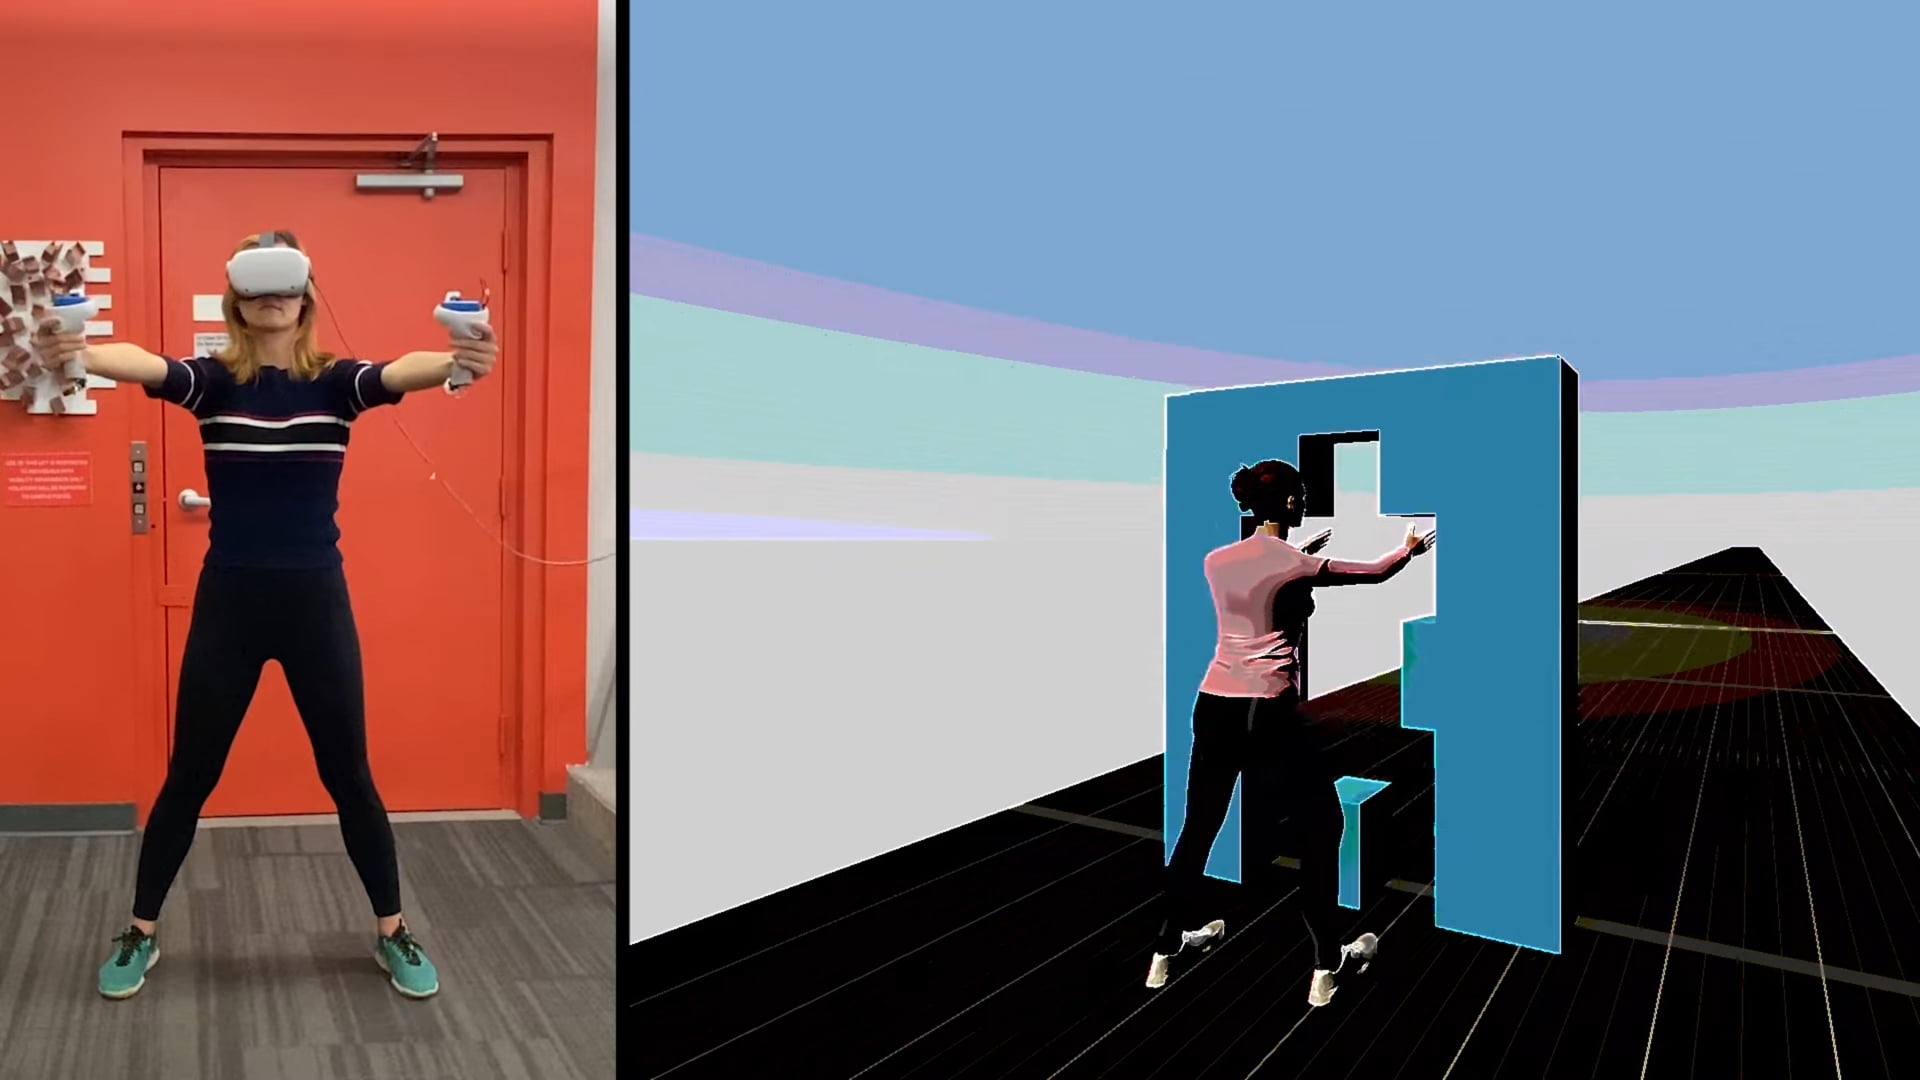 Meta Quest 2: Researchers show body tracking using modded VR controllers